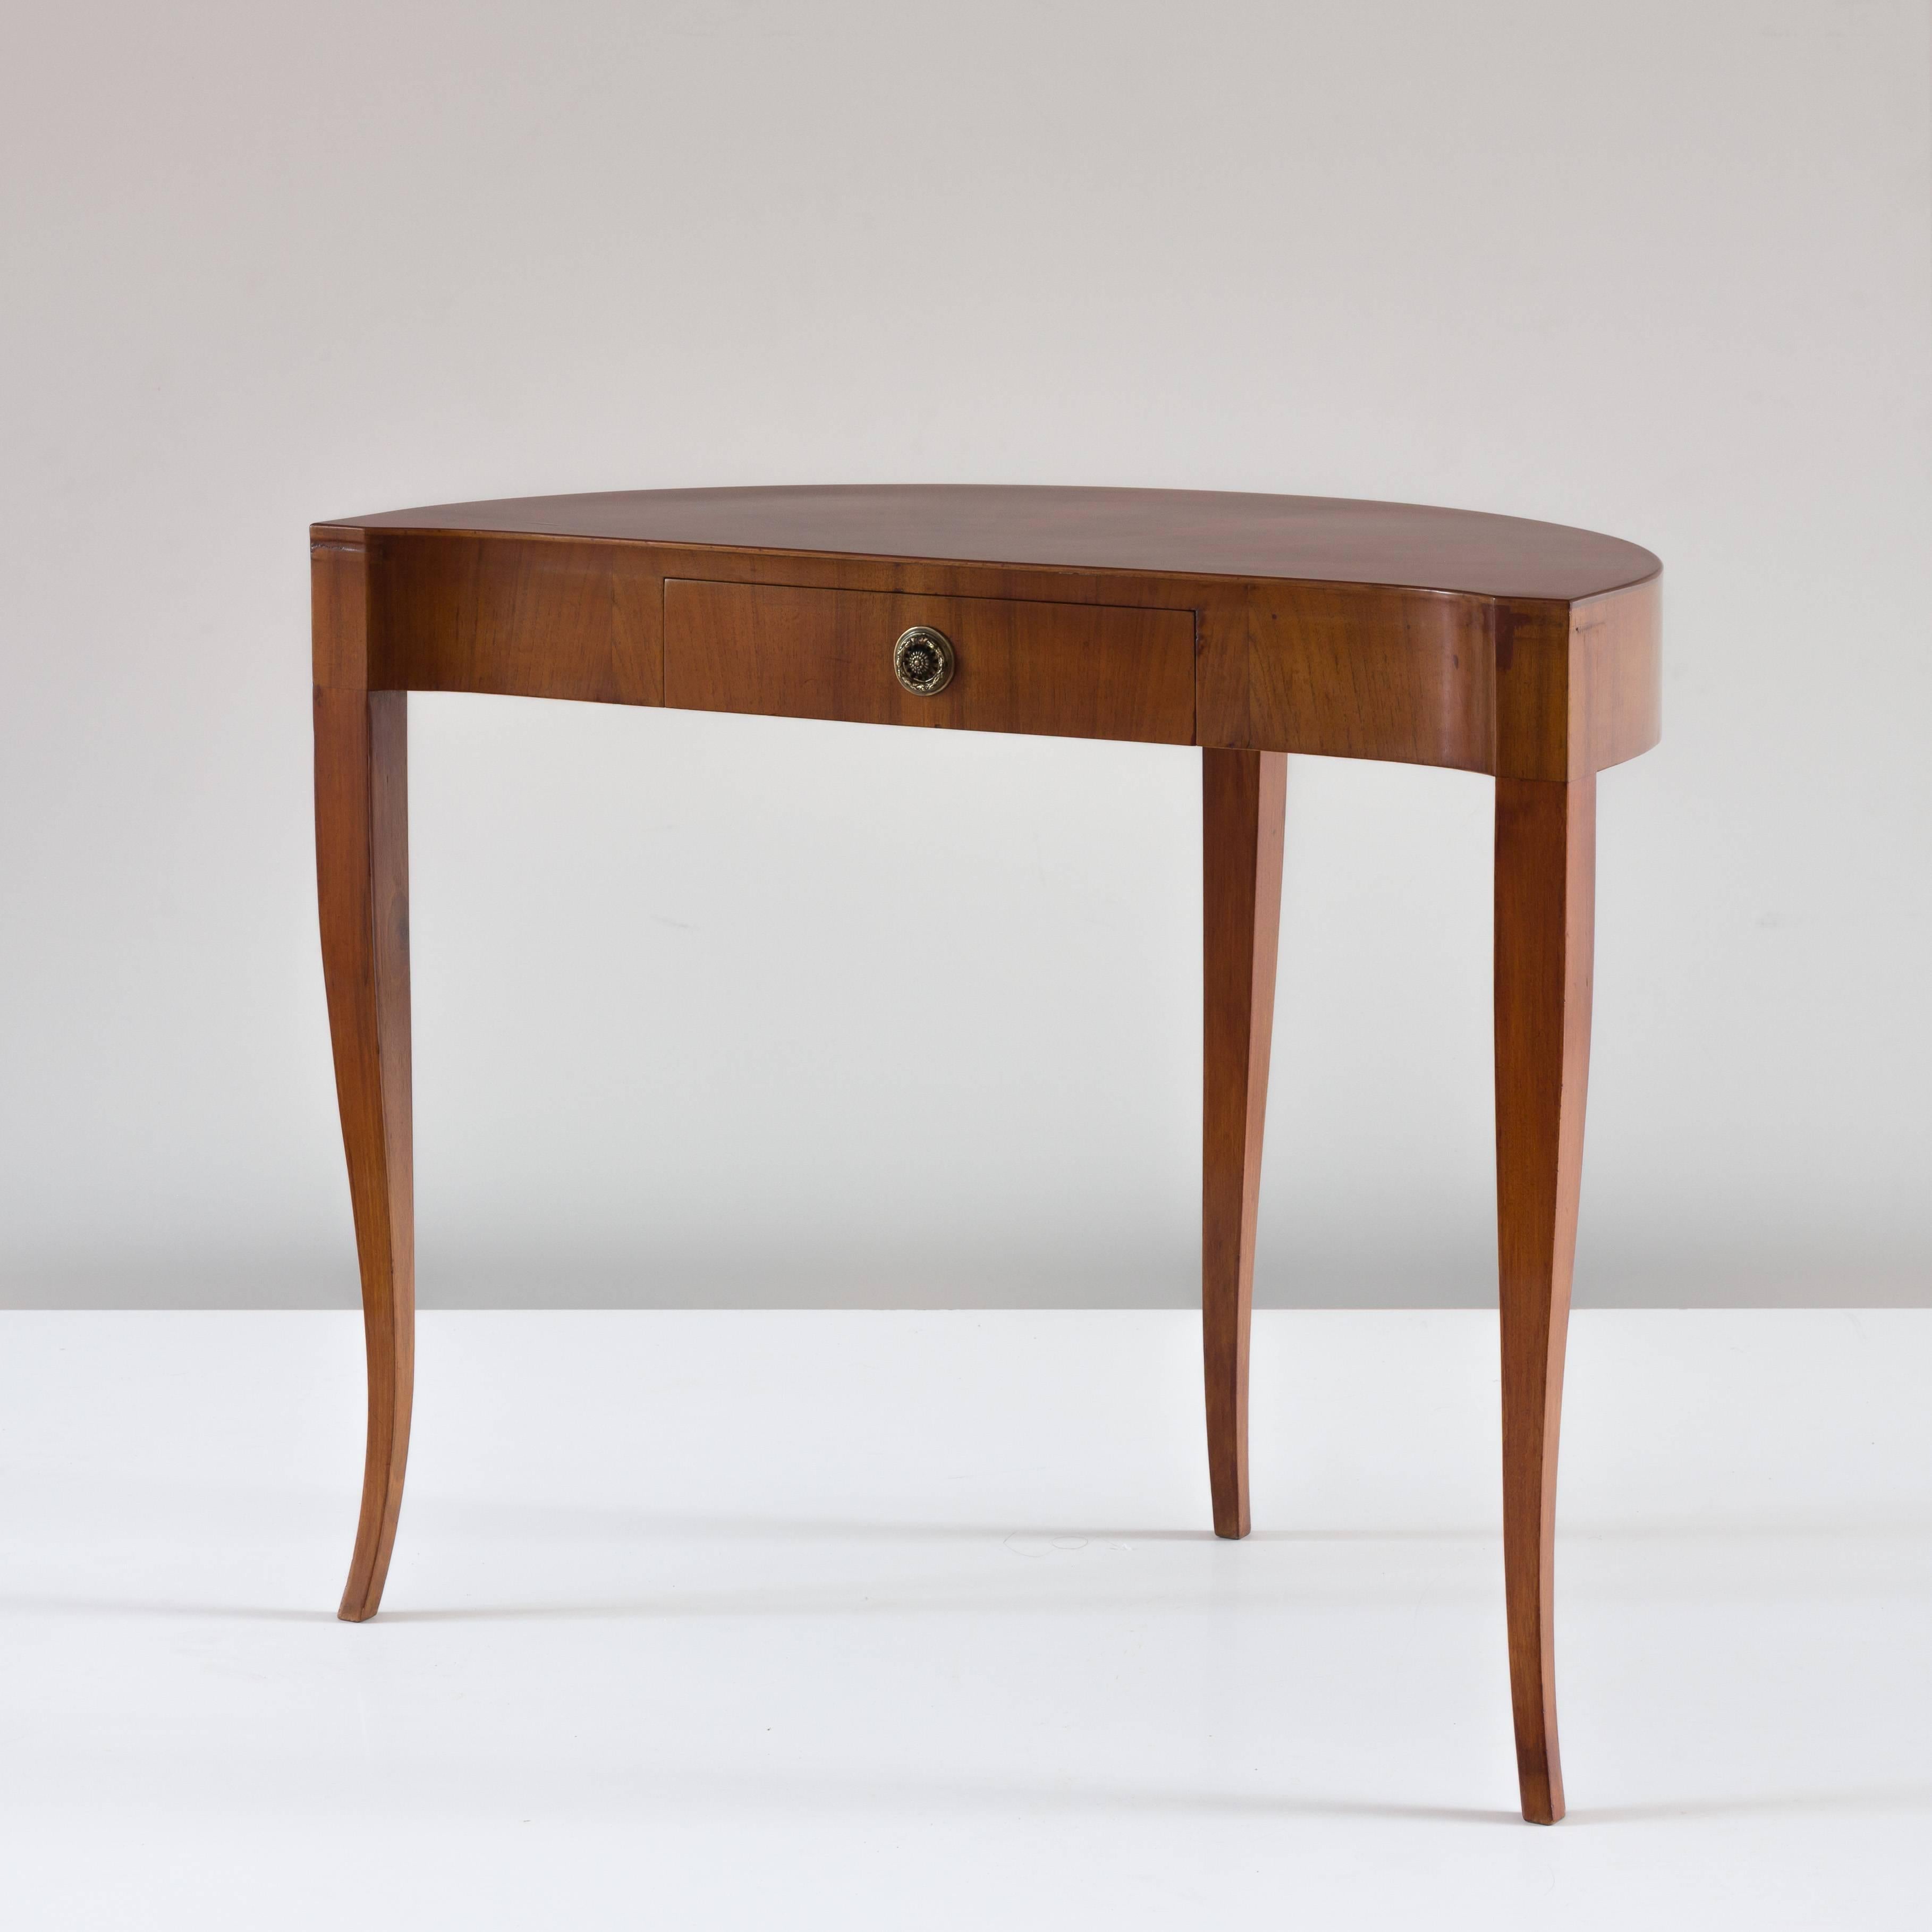 Rare Gio Ponti center demi-lune console table, 1928-1930
produced form Domus Nova.
Three sinuous and elegant legs
one-drawer
walnut, brass
very good original condition.
Measures: H 79cm, 94 x 52.
Sold together with a certificate of